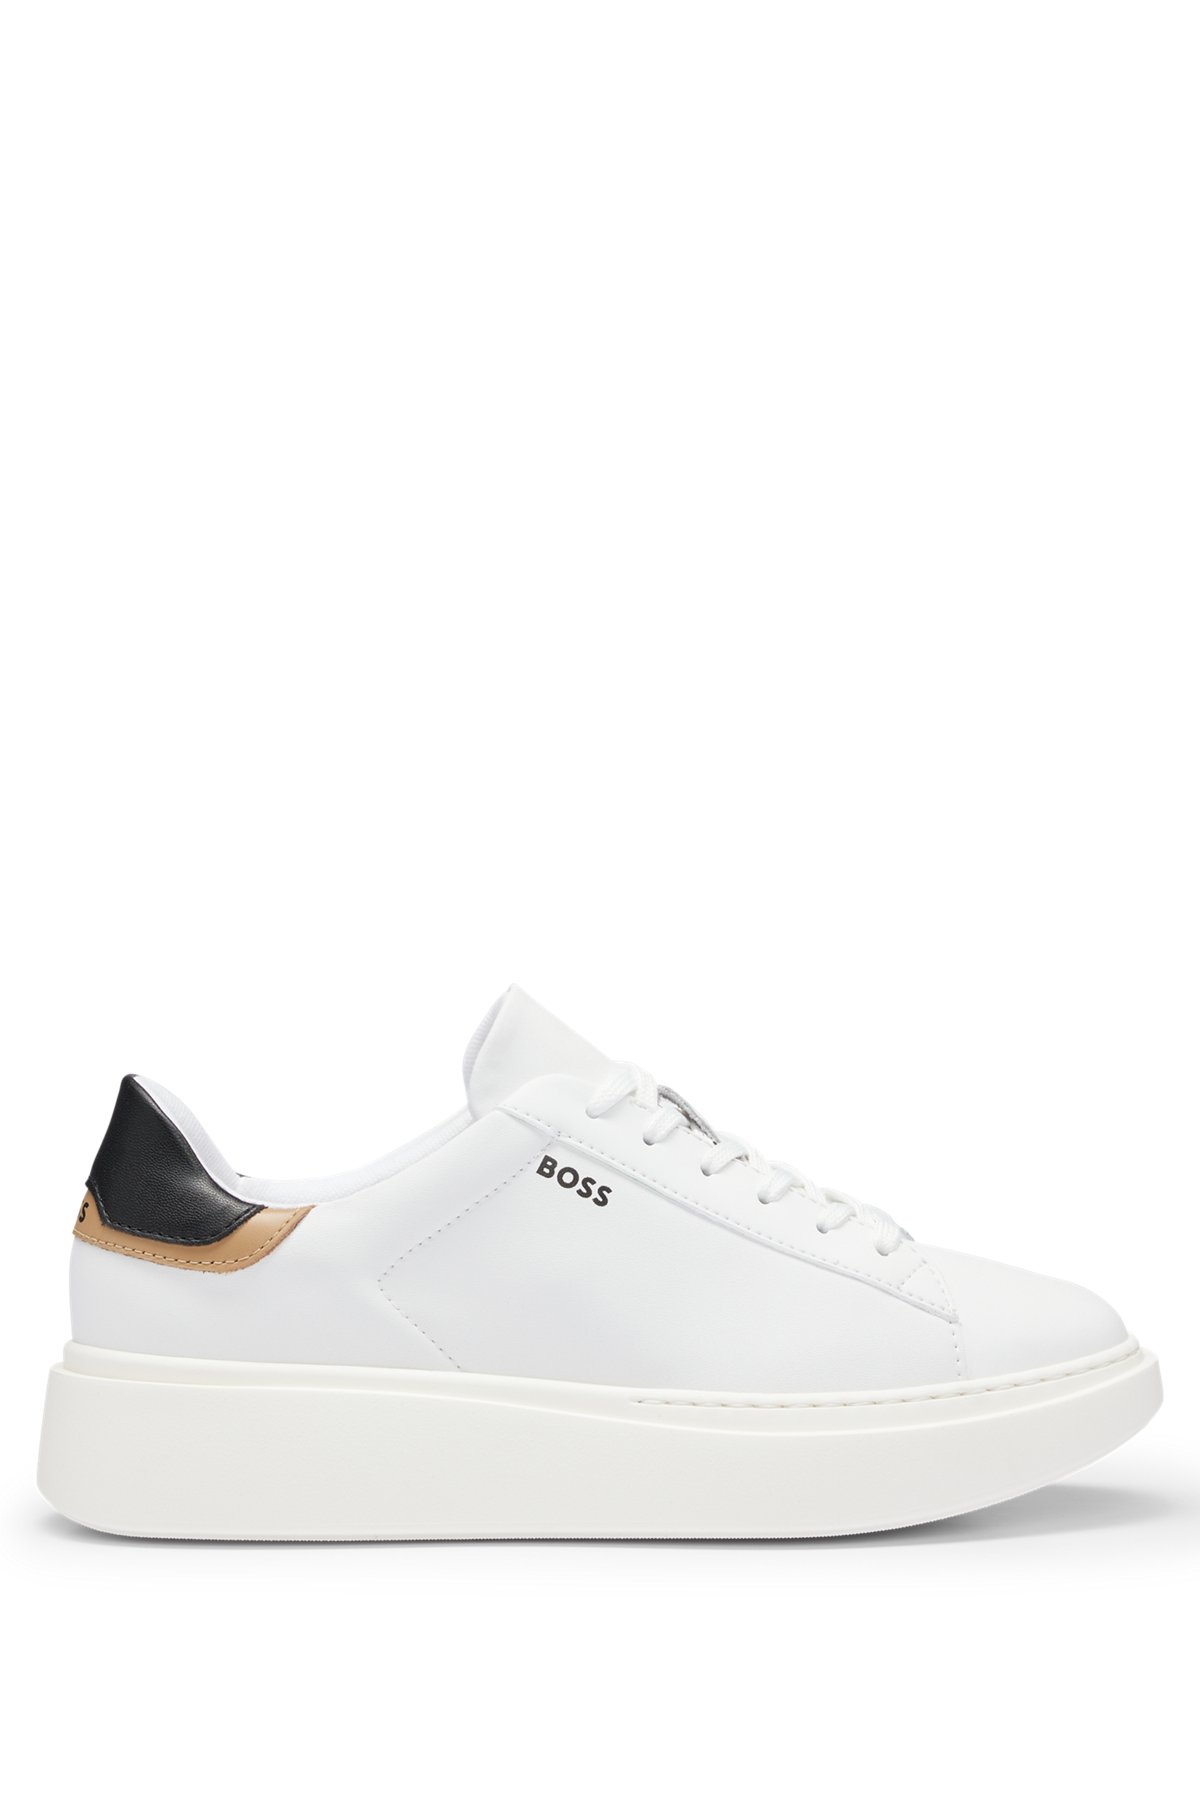 Lowtop Sneakers mit Signature-Details, Weiß